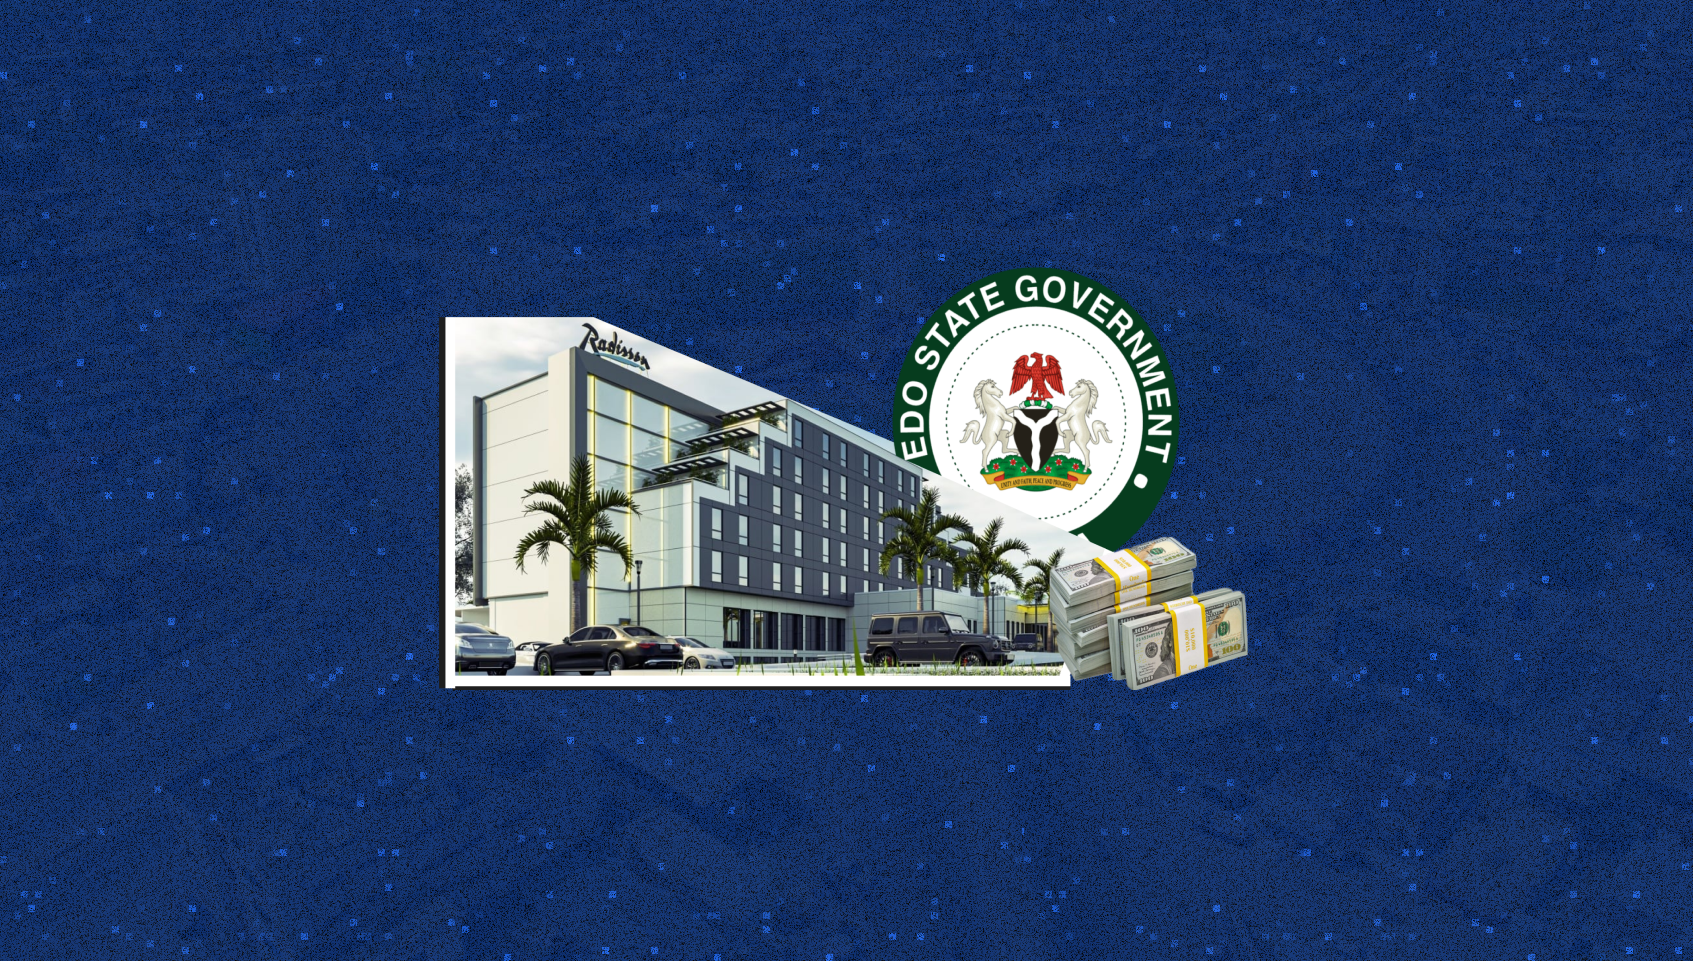 Edo State Government-Owned HIMC Announces Investment Opportunity in Edo Radisson Hotel